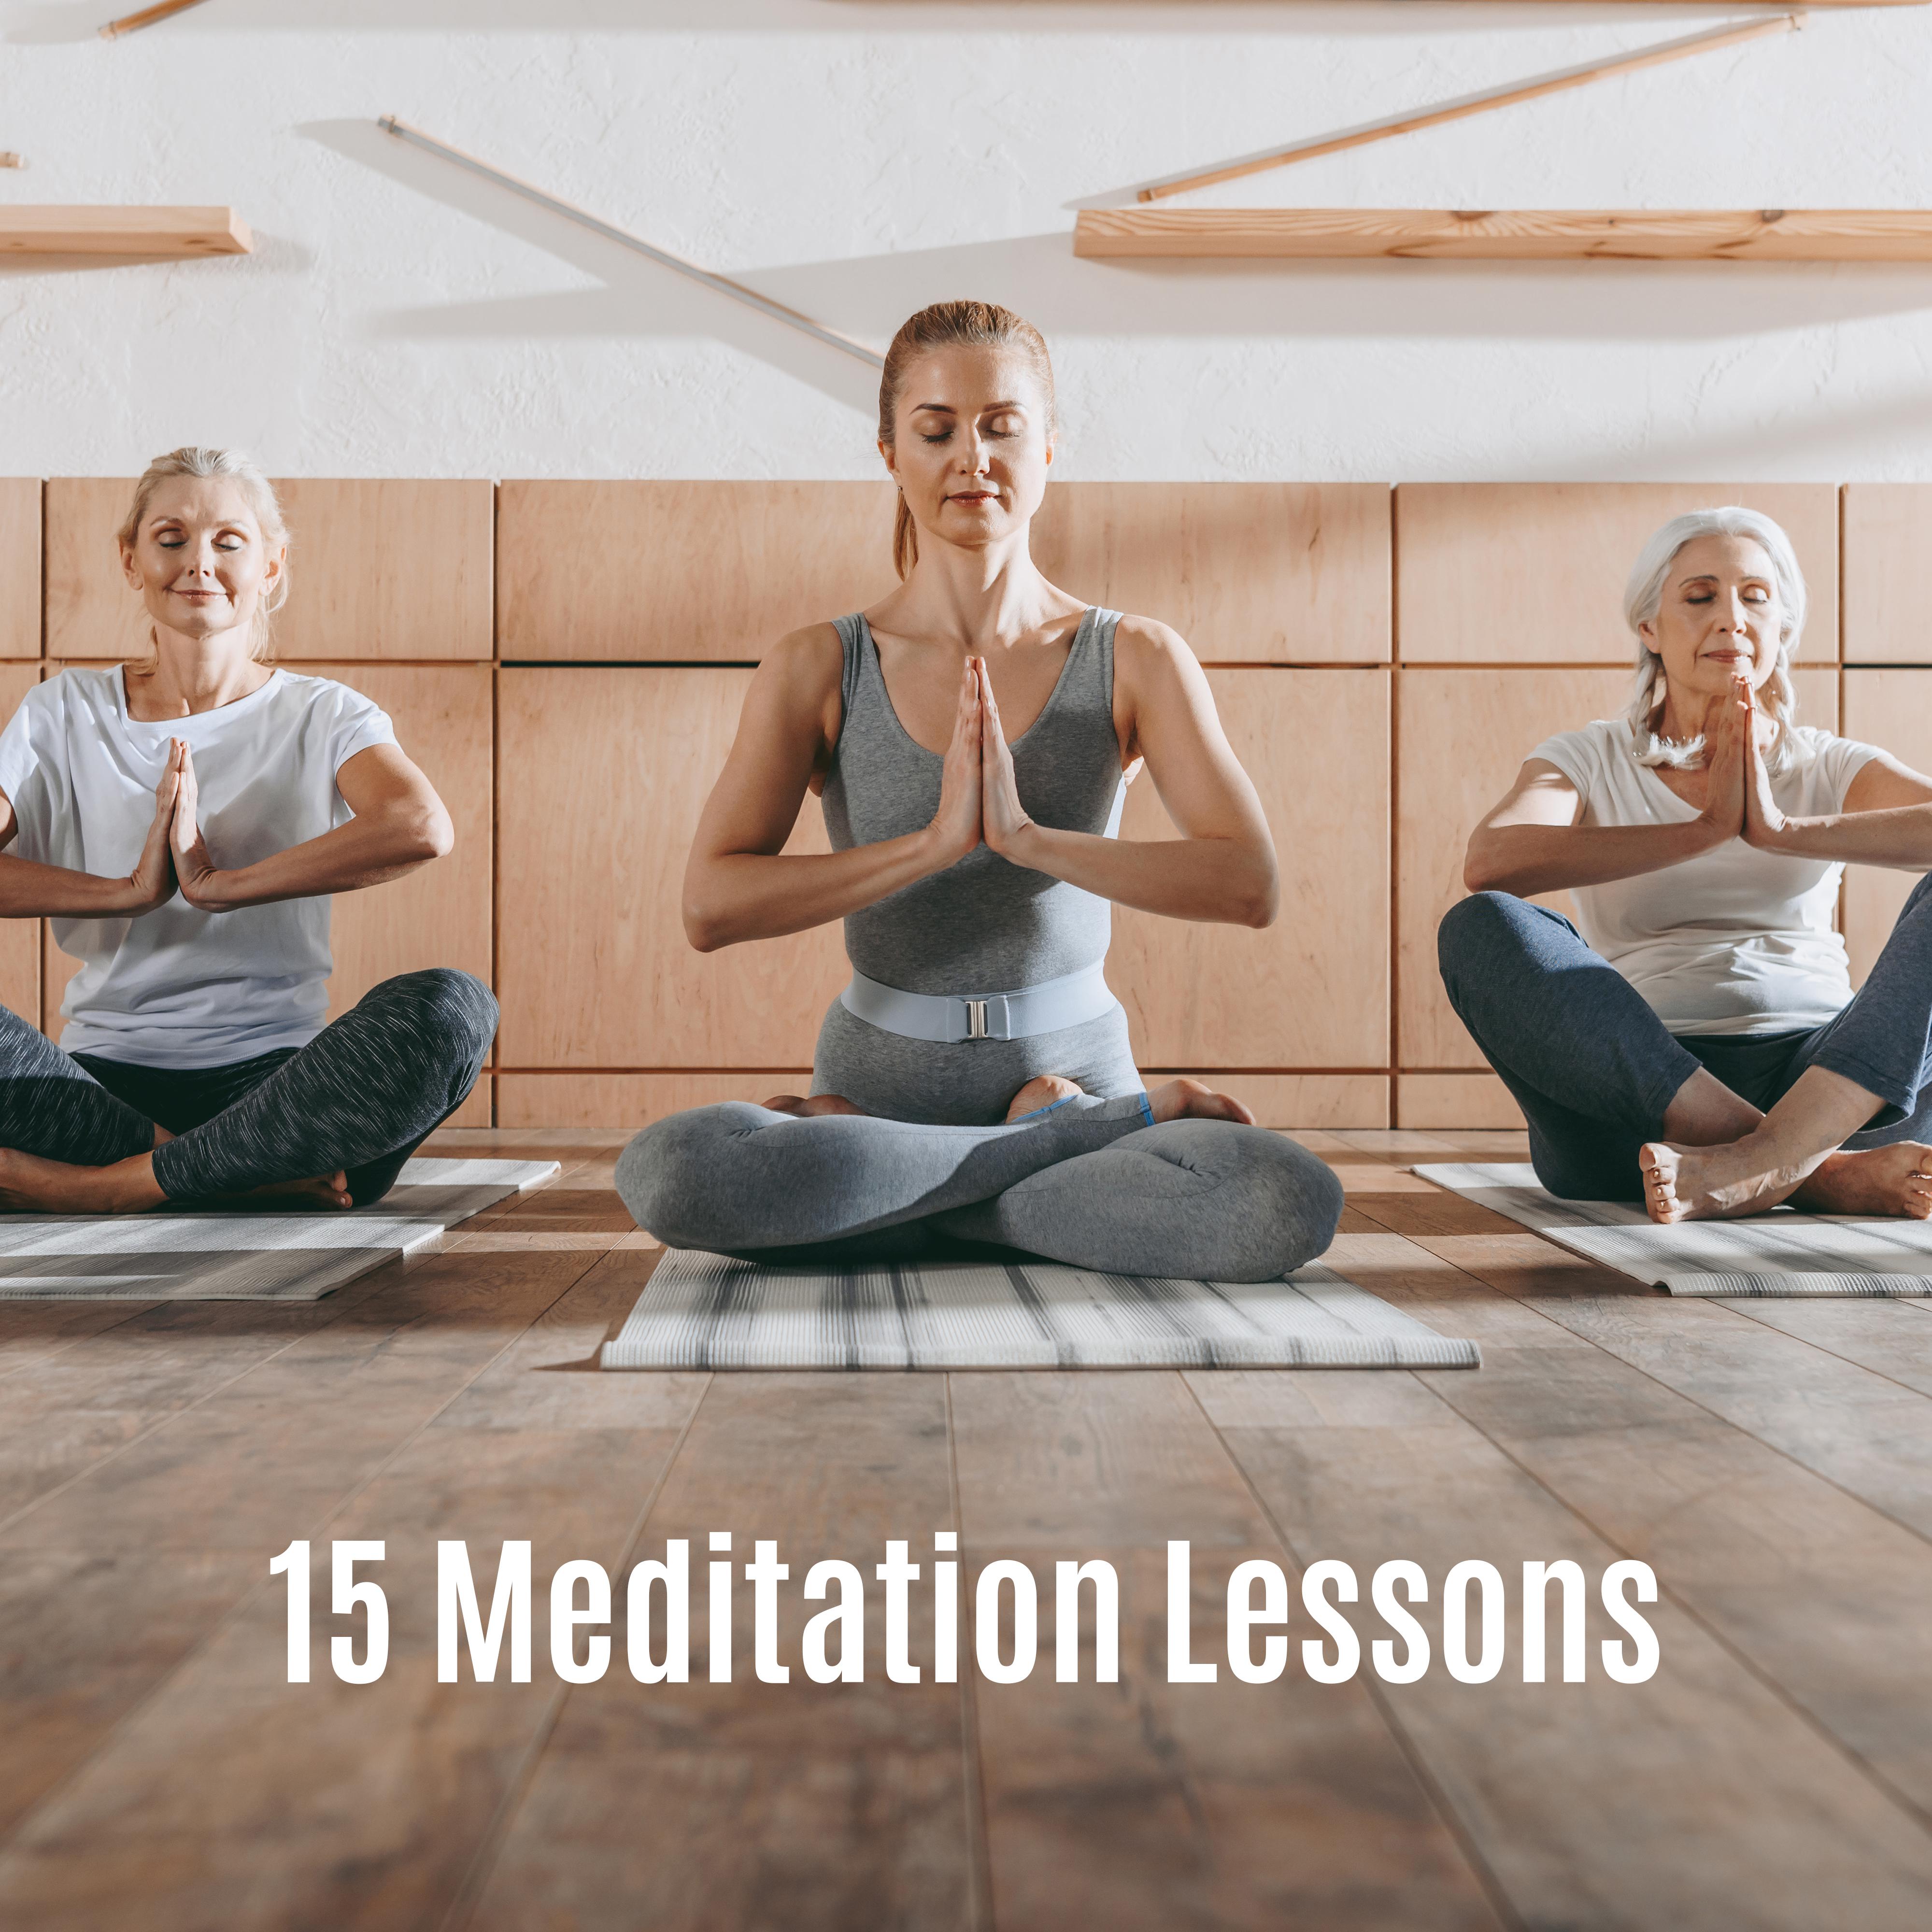 15 Meditation Lessons: 2019 New Age Music Compilation for Beginner’s Yoga Training & Relaxation, Train All Poses from Rookie to Pro, Improve Your Focus, Increase Vital Energy